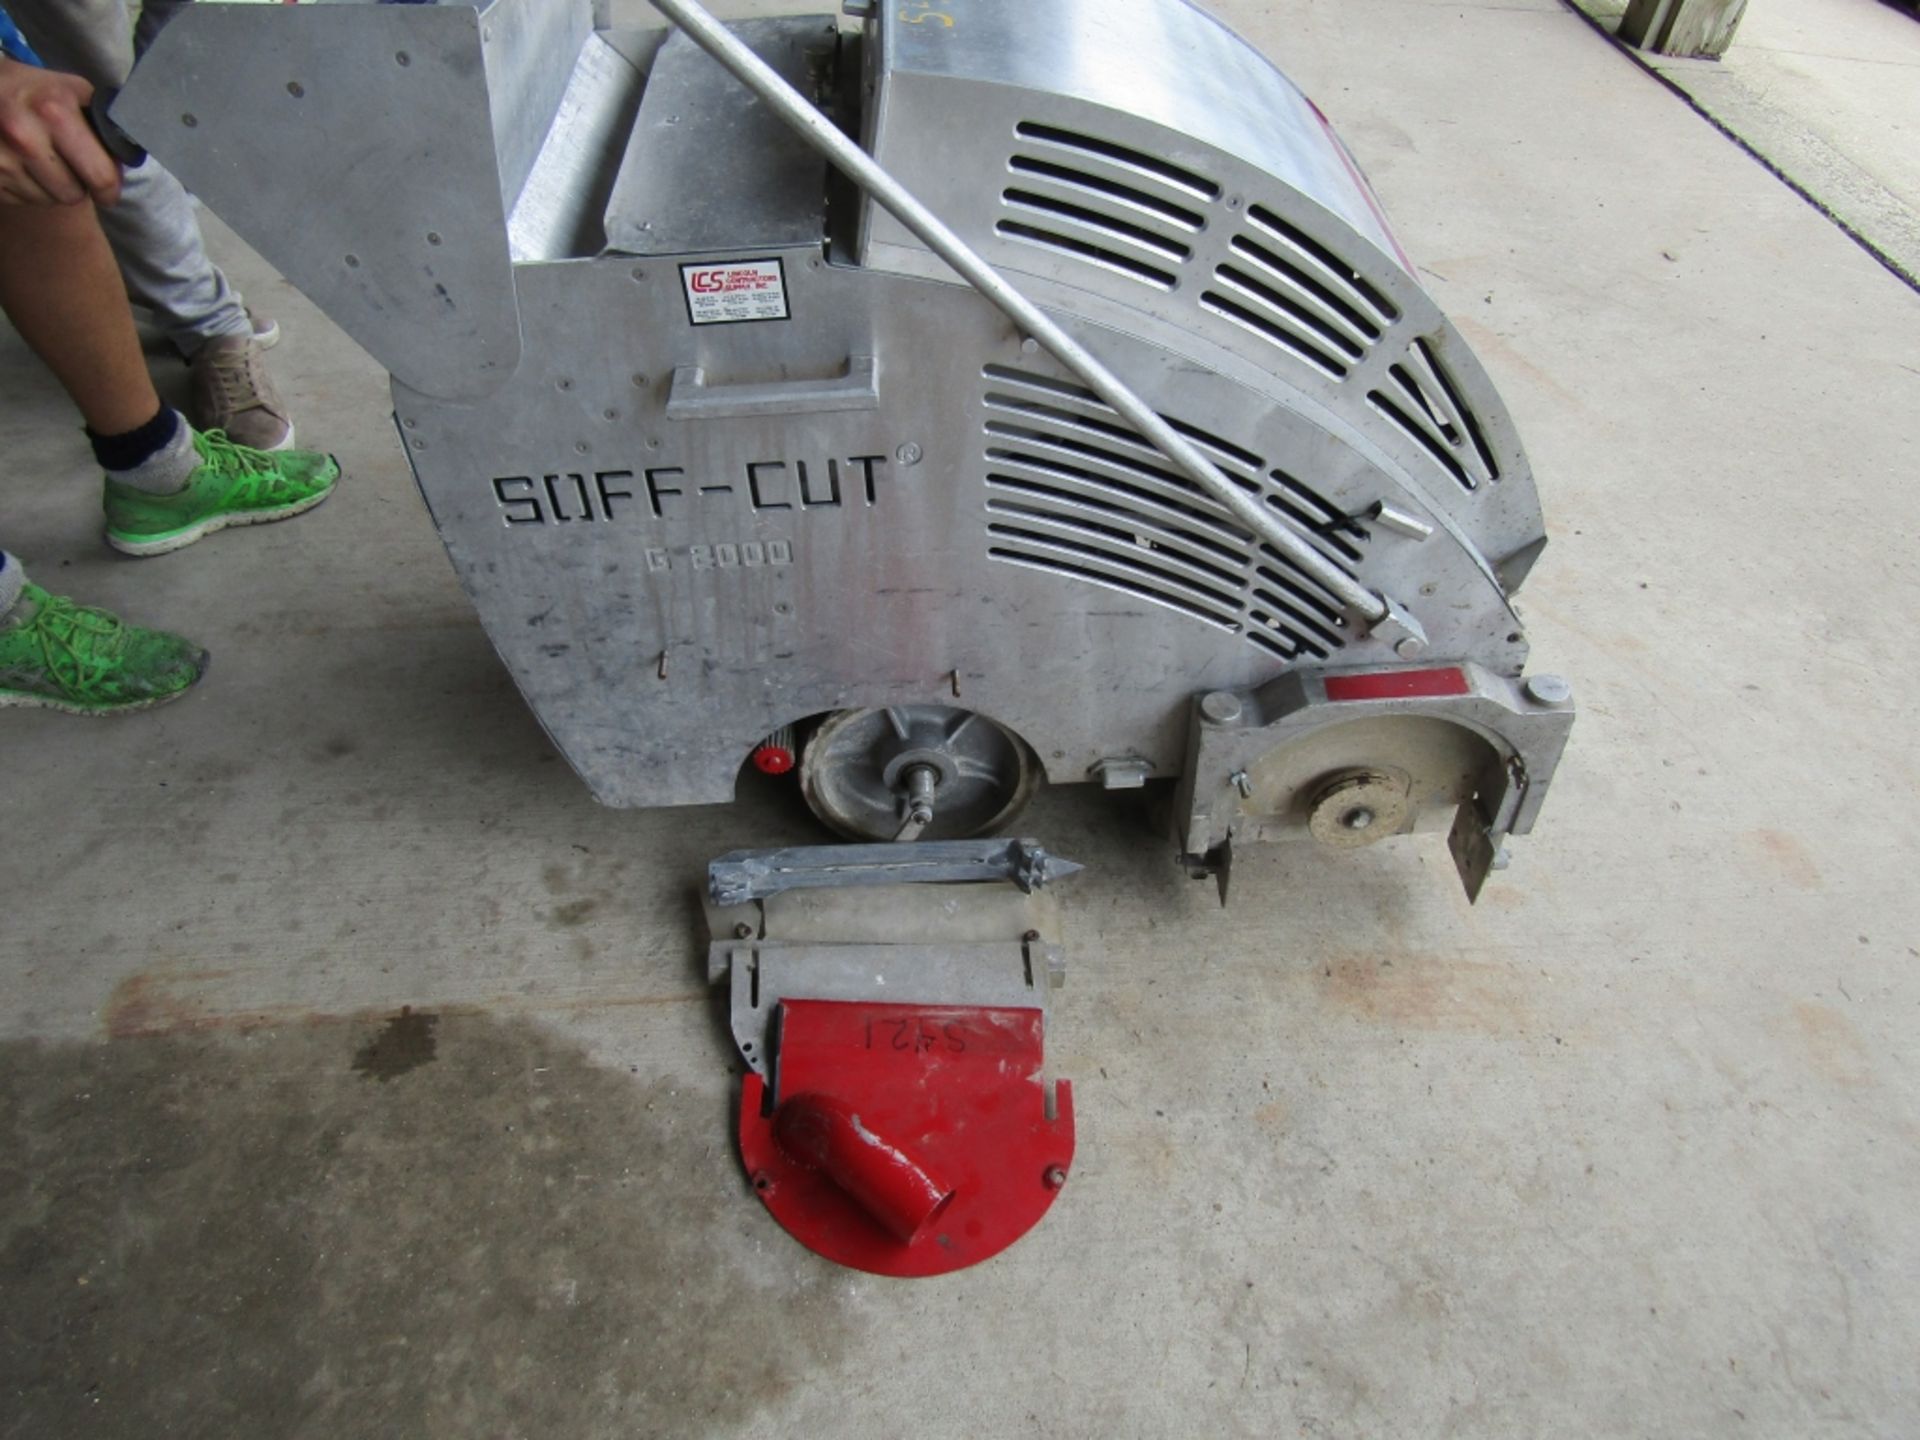 Soff-Cutt G-2000 Walk Behind Concrete Saw, Model G2000, 882 Hours, Serial #1421, - Image 3 of 7